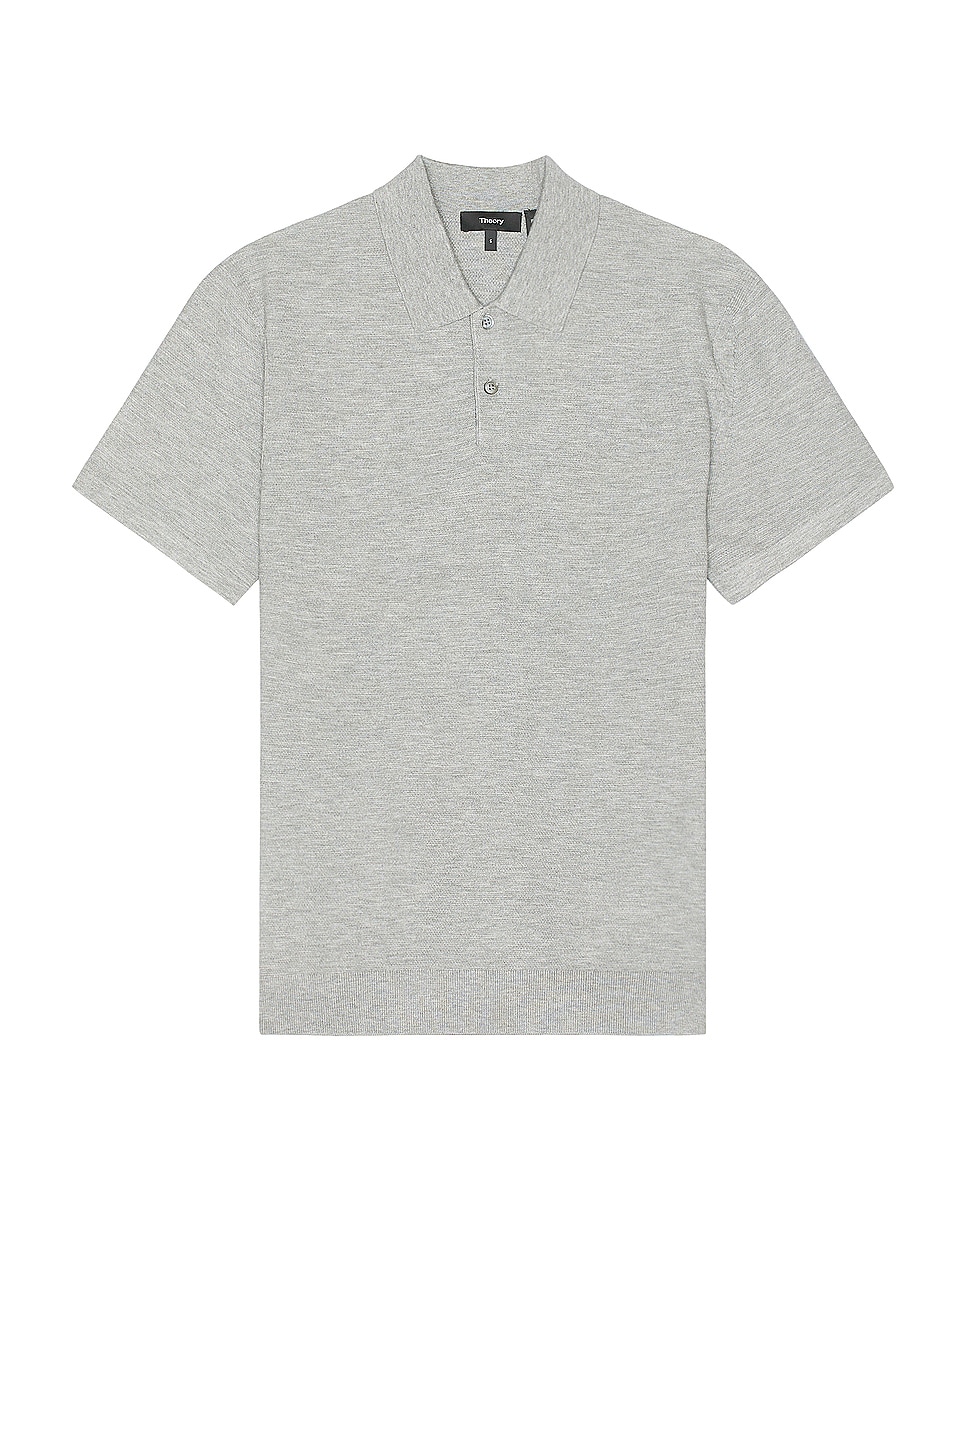 Image 1 of Theory Goris Sweater Polo in Light Grey Heather